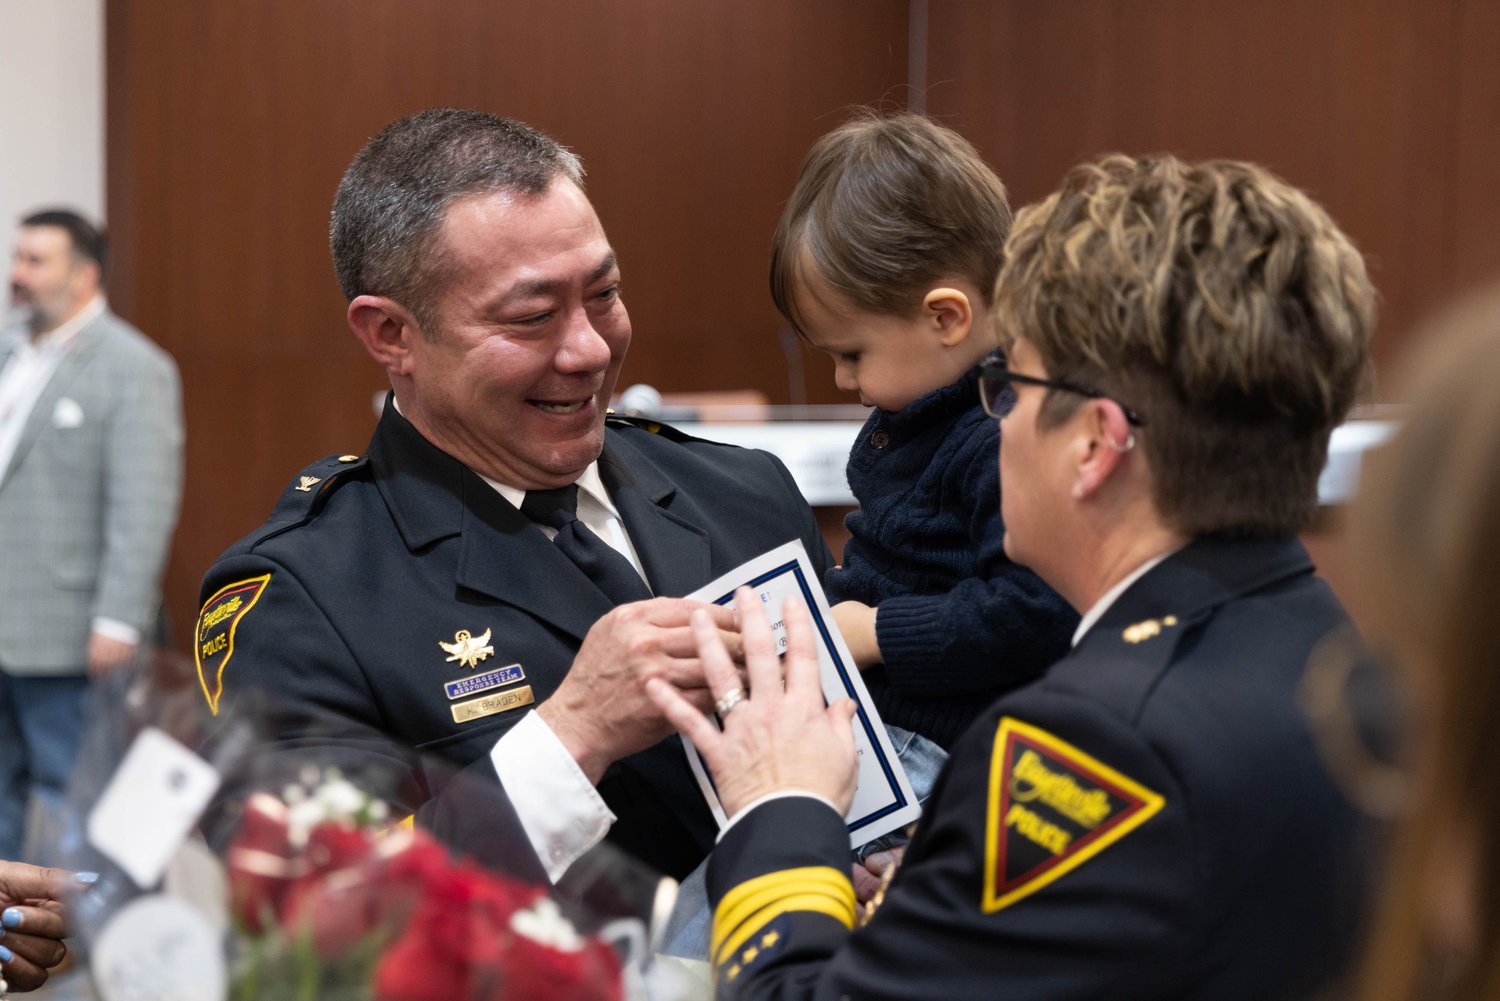 Fayetteville Police Chief Kemberle Braden holds his grandson as he speaks with Maj. Kelle Berg during Braden's swearing-in Friday afternoon.